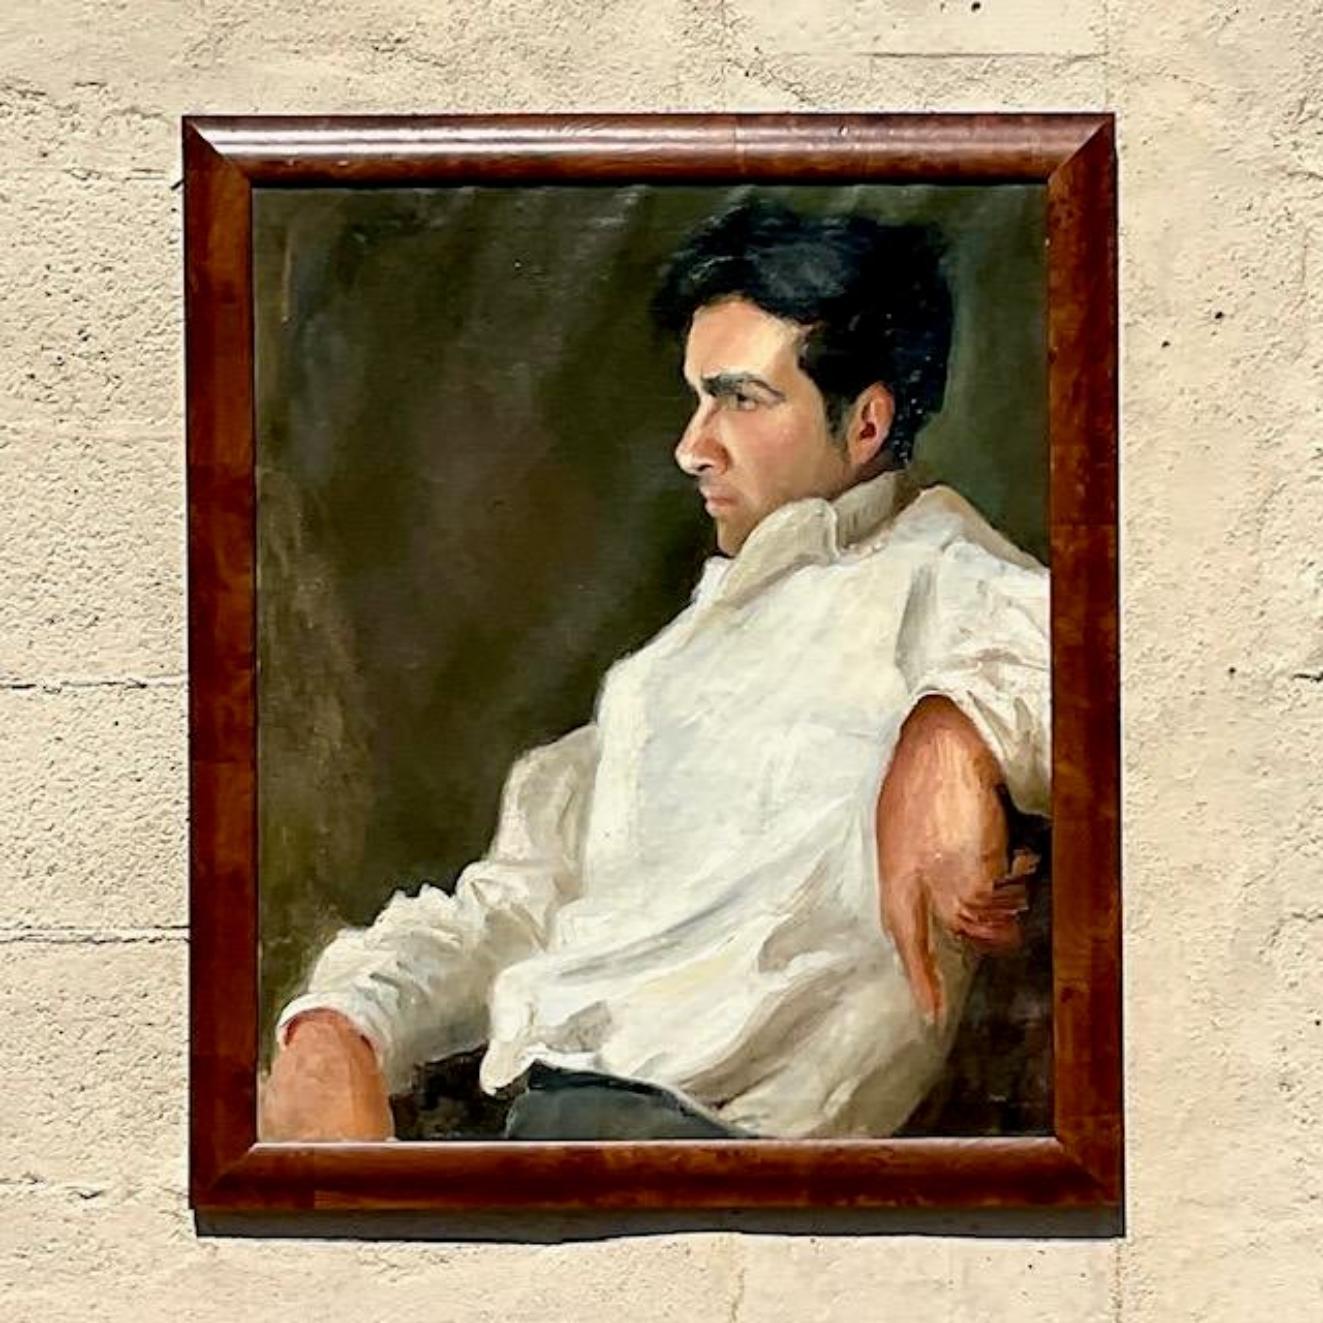 A fabulous vintage Boho original oil painting on canvas. A chic portrait of a handsome young man in profile. Acquired from a Palm Beach estate.